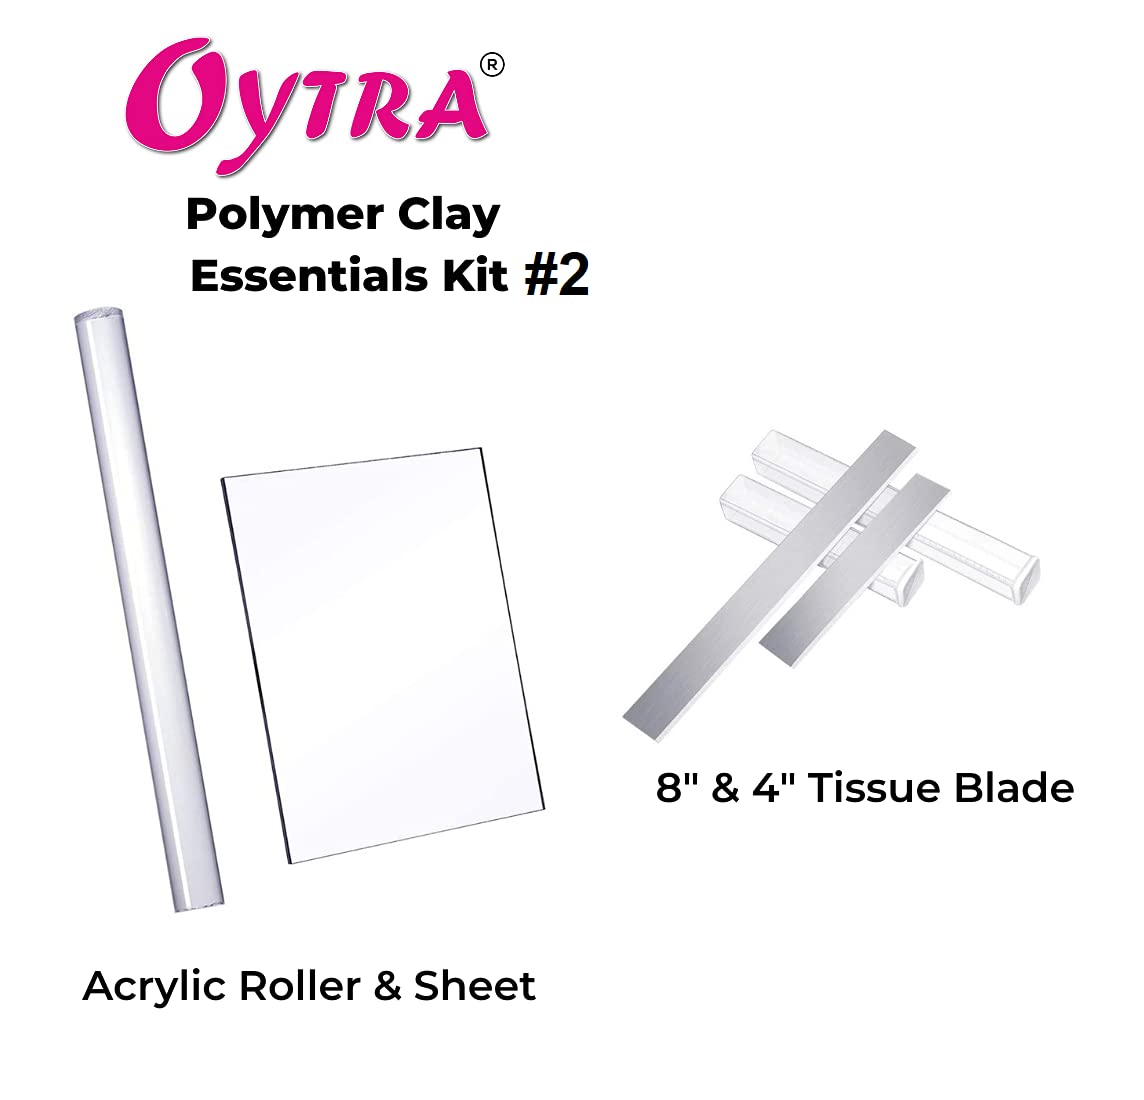 Solid Oytra Oven Bake Polymer Clay at Rs 150/pack, Polymer Clay in Mumbai